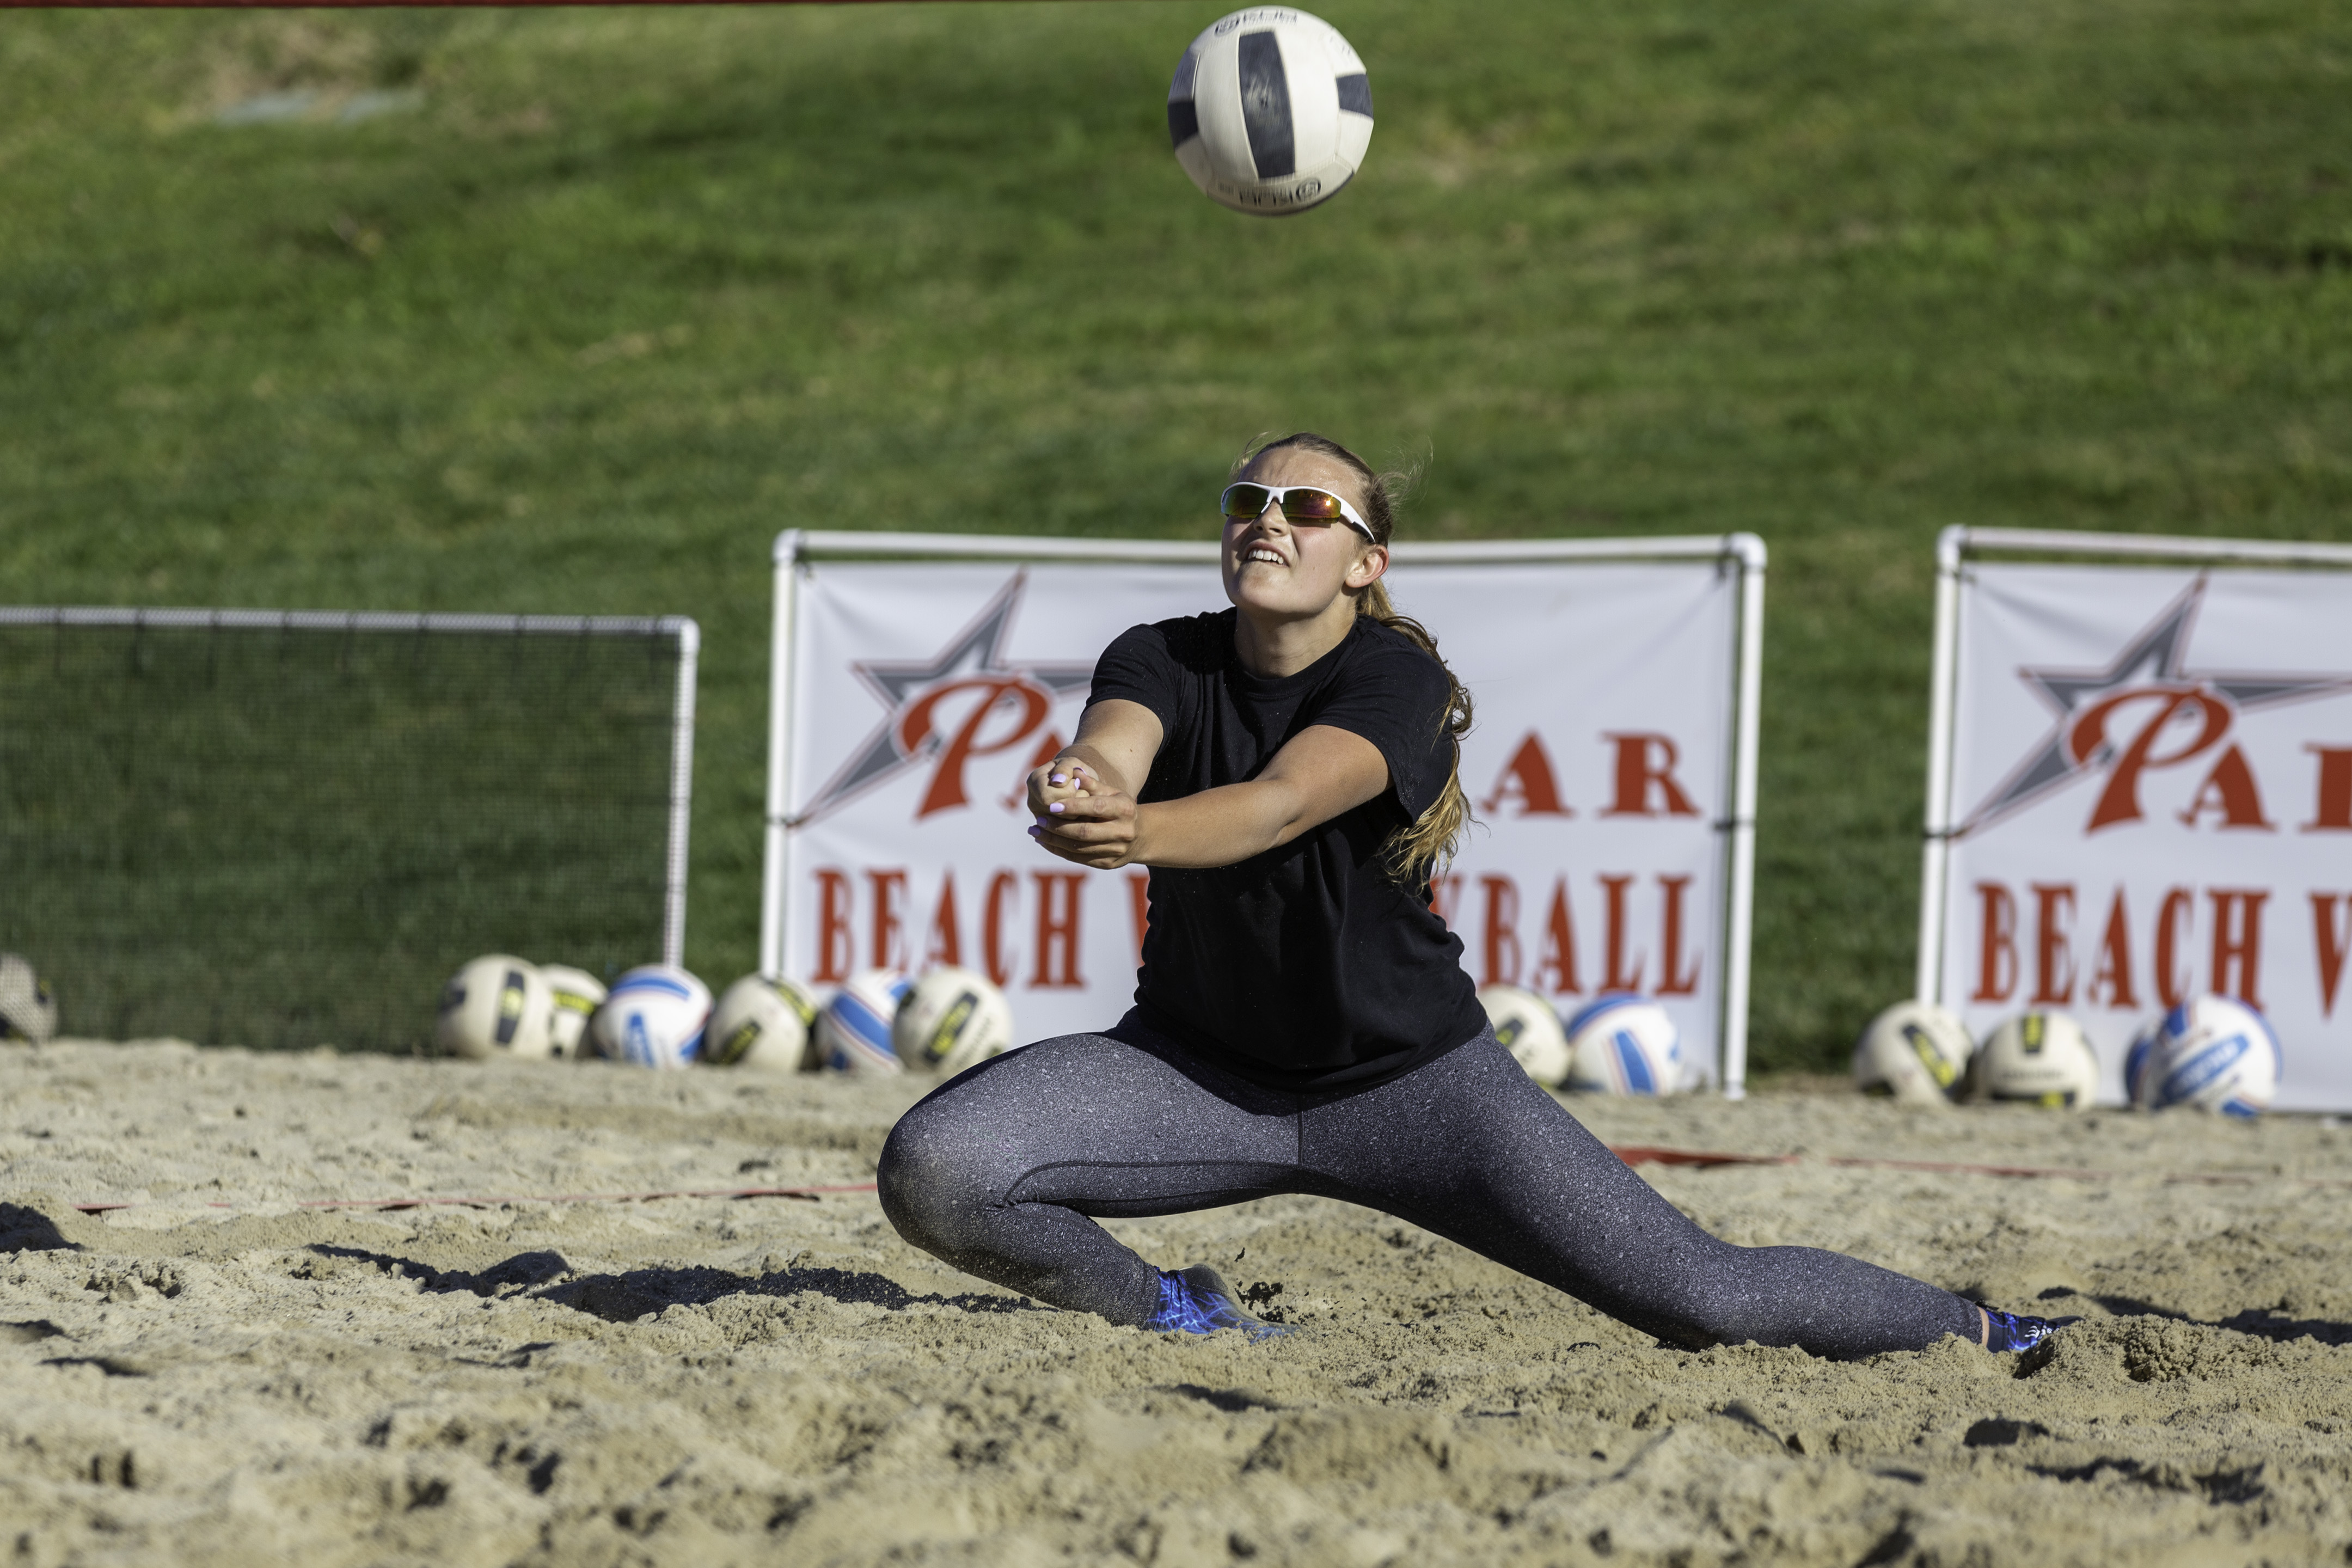 A female Palomar beach volleyball player lunges down to the left as she tries to bump a volleyball with her forearms.